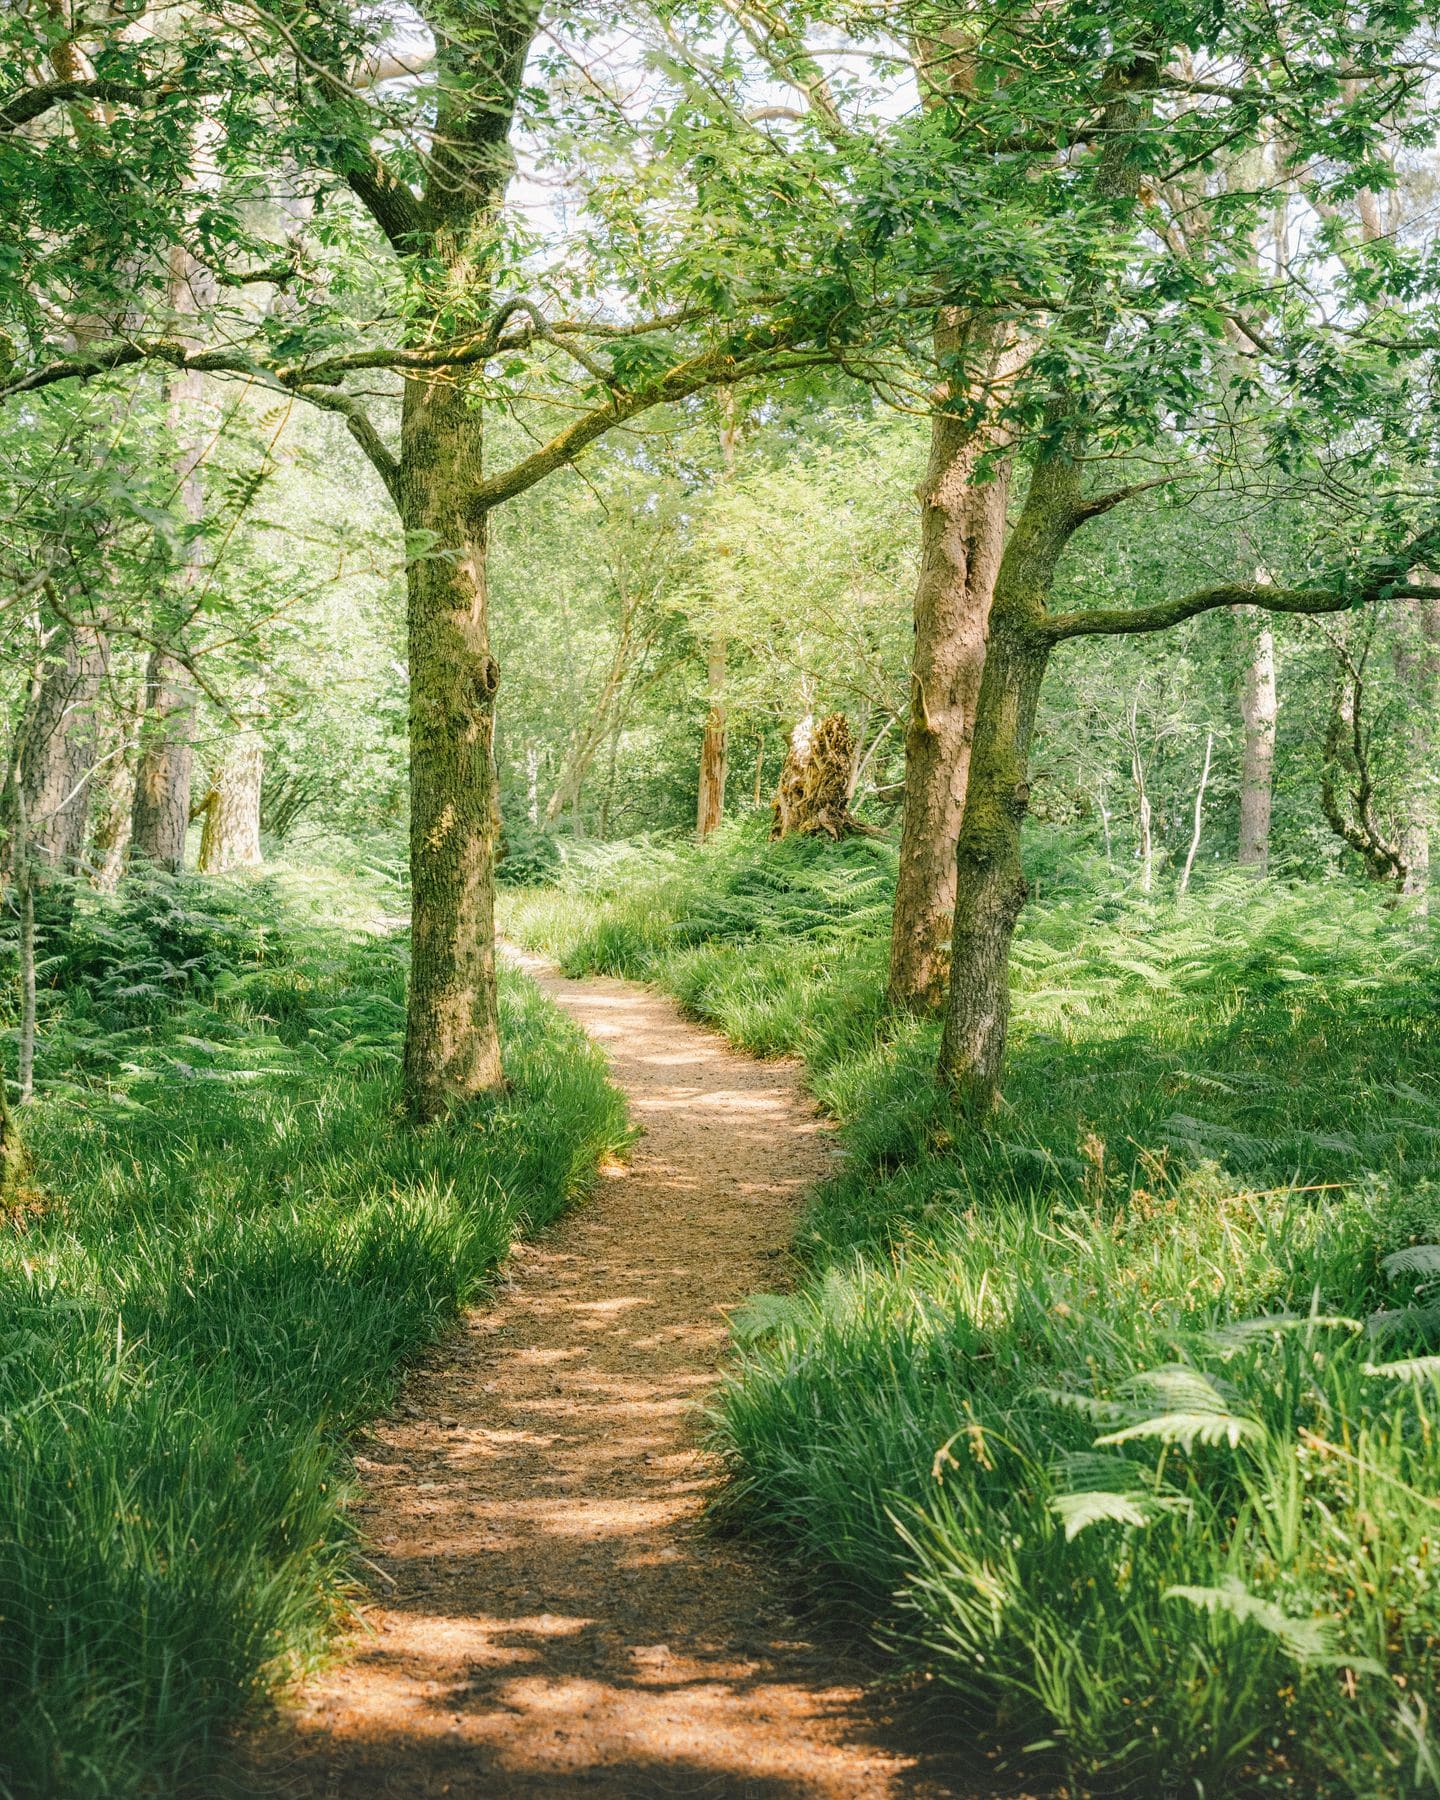 A dirt path across a bright green forest